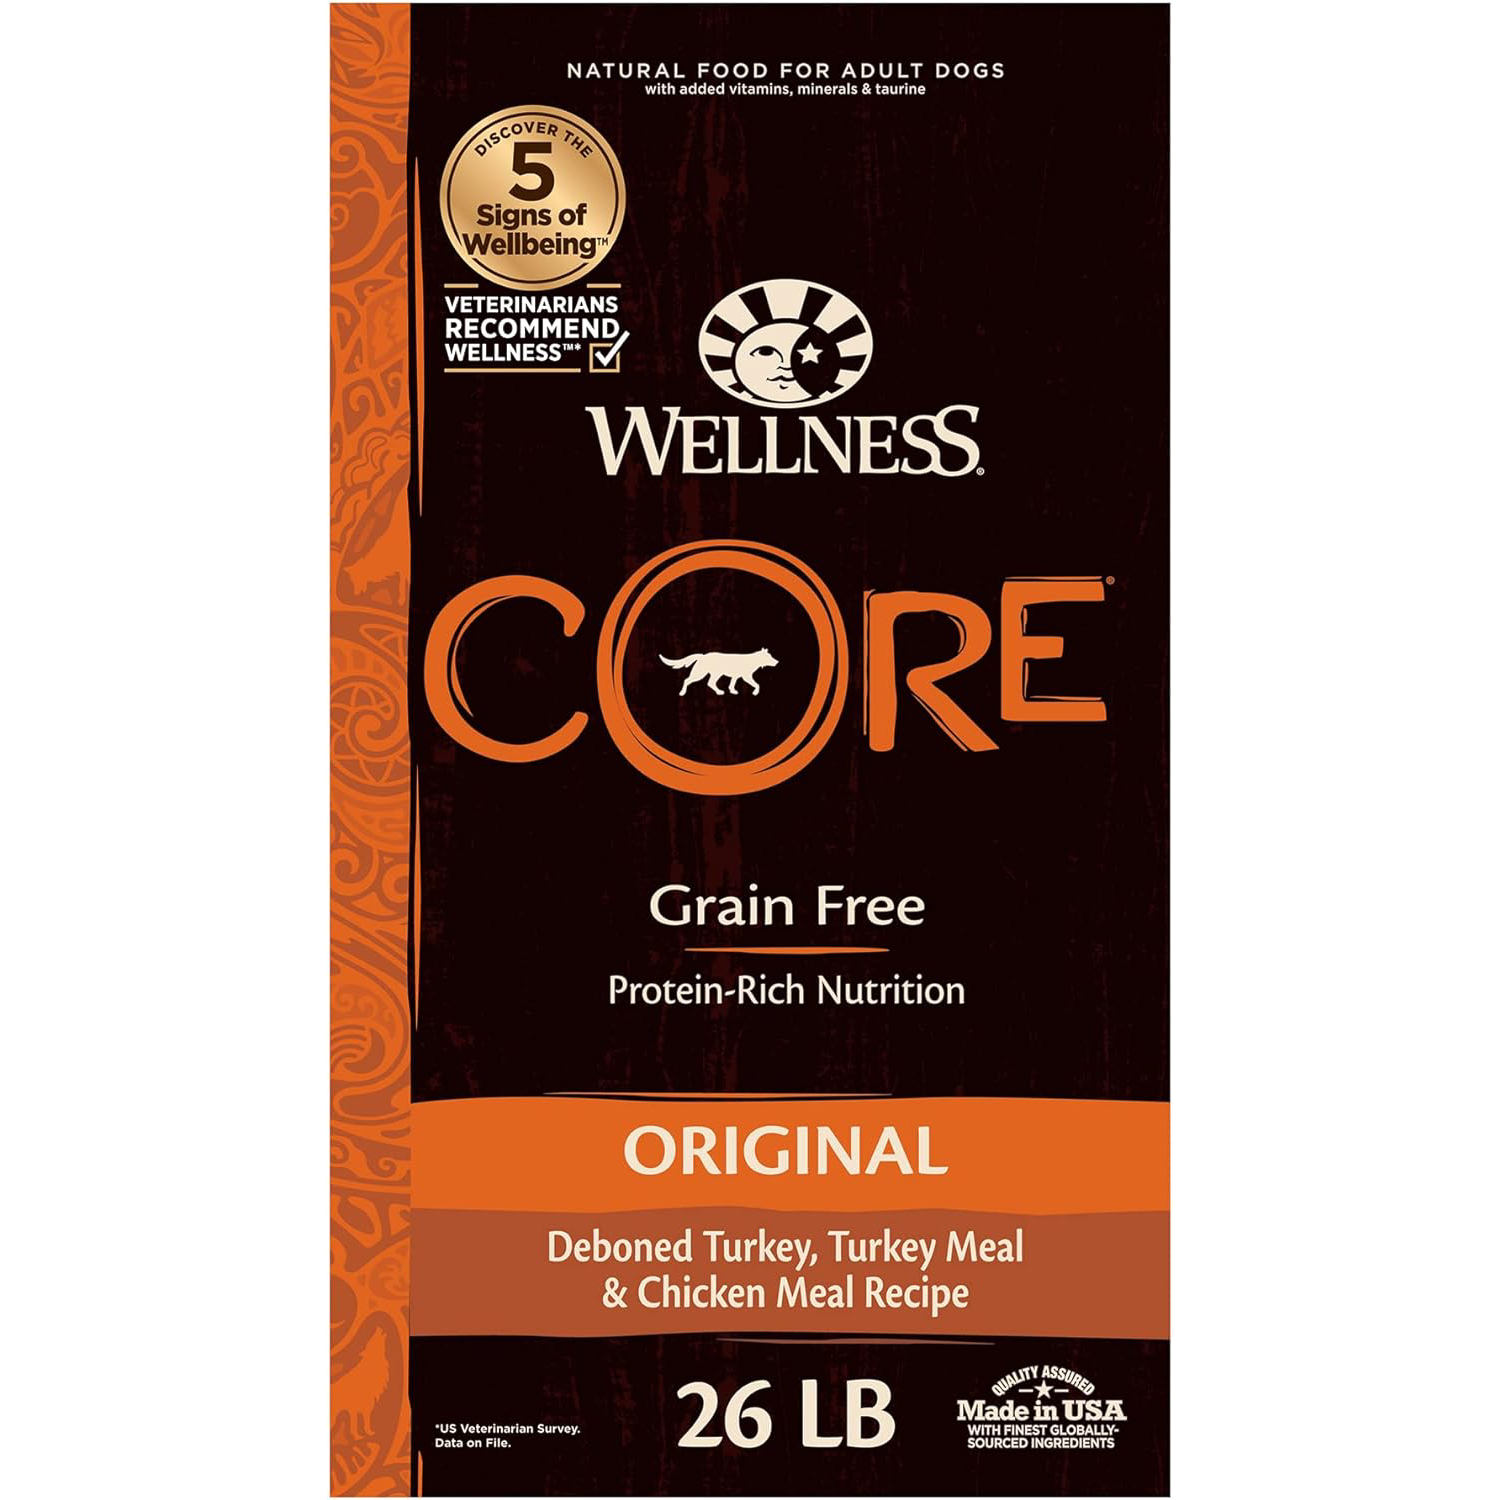 New Project Wellness CORE Grain-Free High-Protein Dry Dog Food